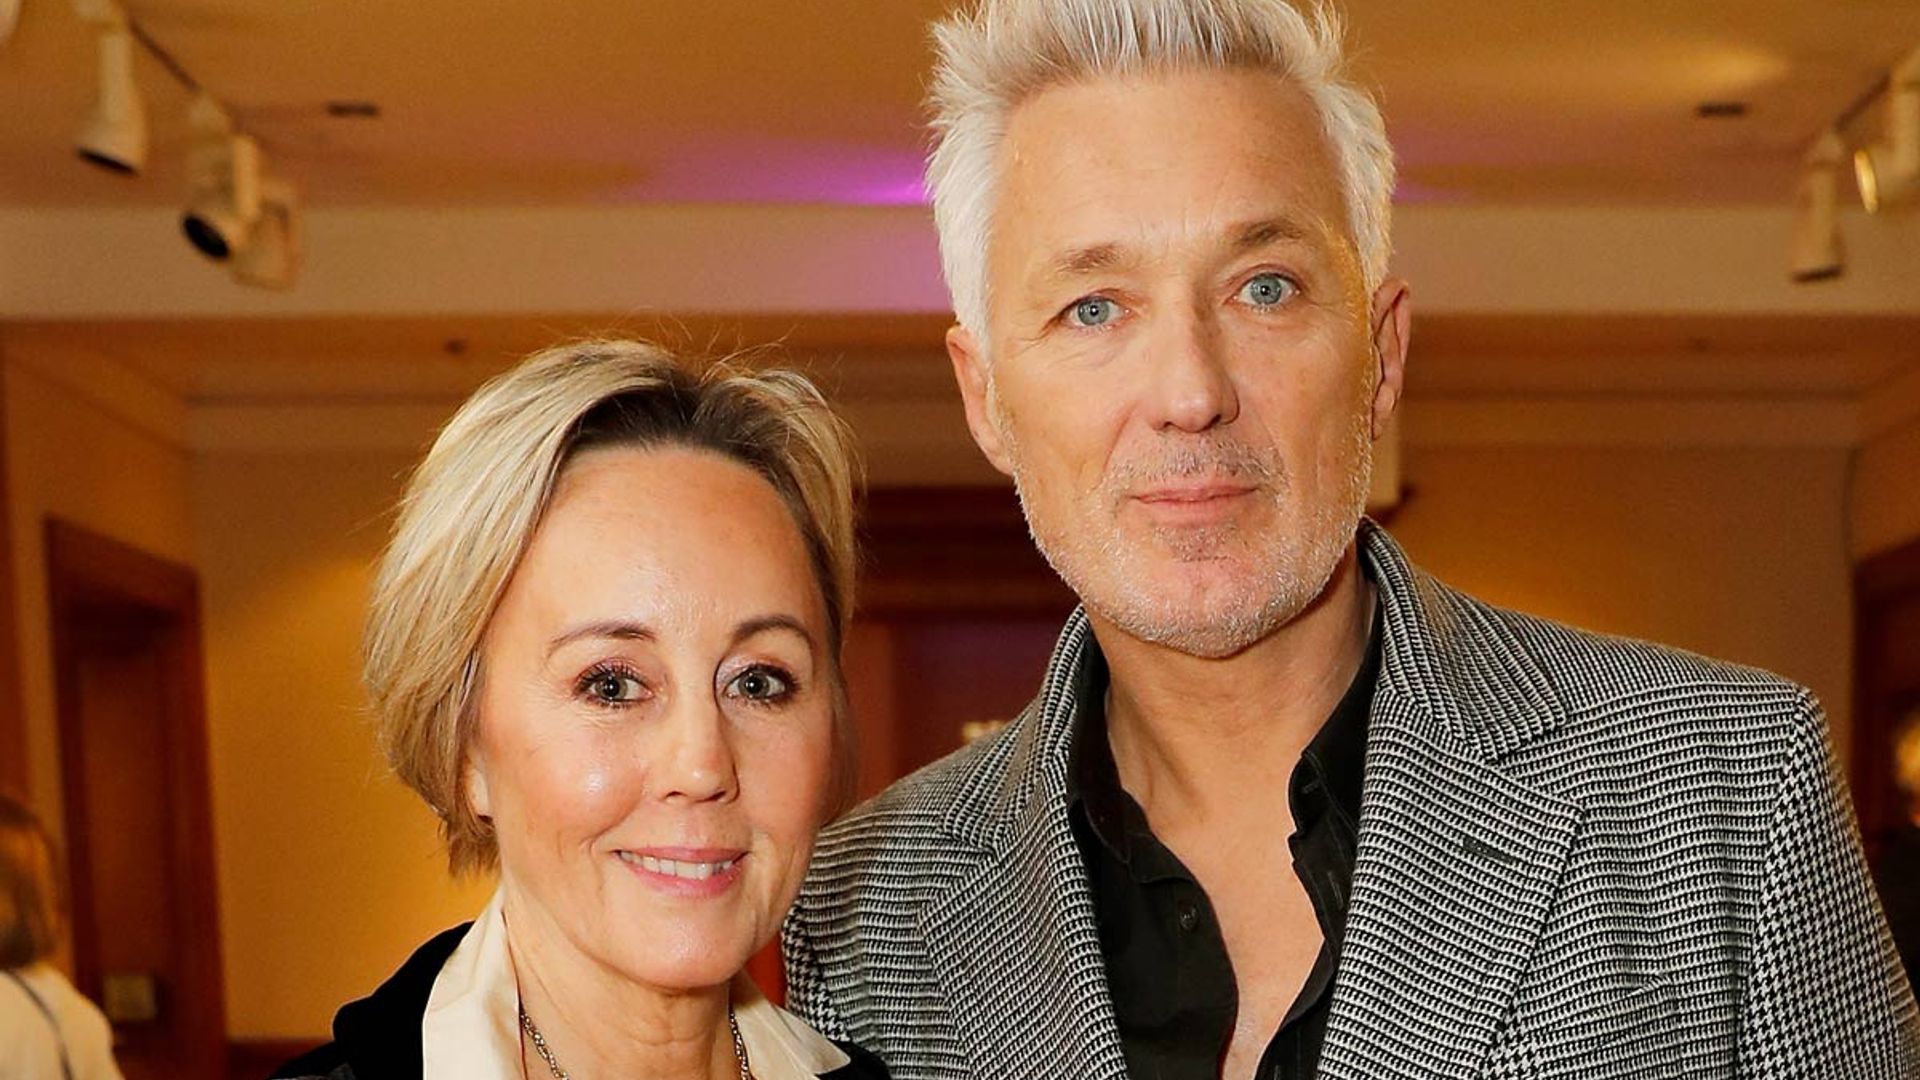 Martin Kemp's wife Shirlie shares unreal before and after home transformation photos